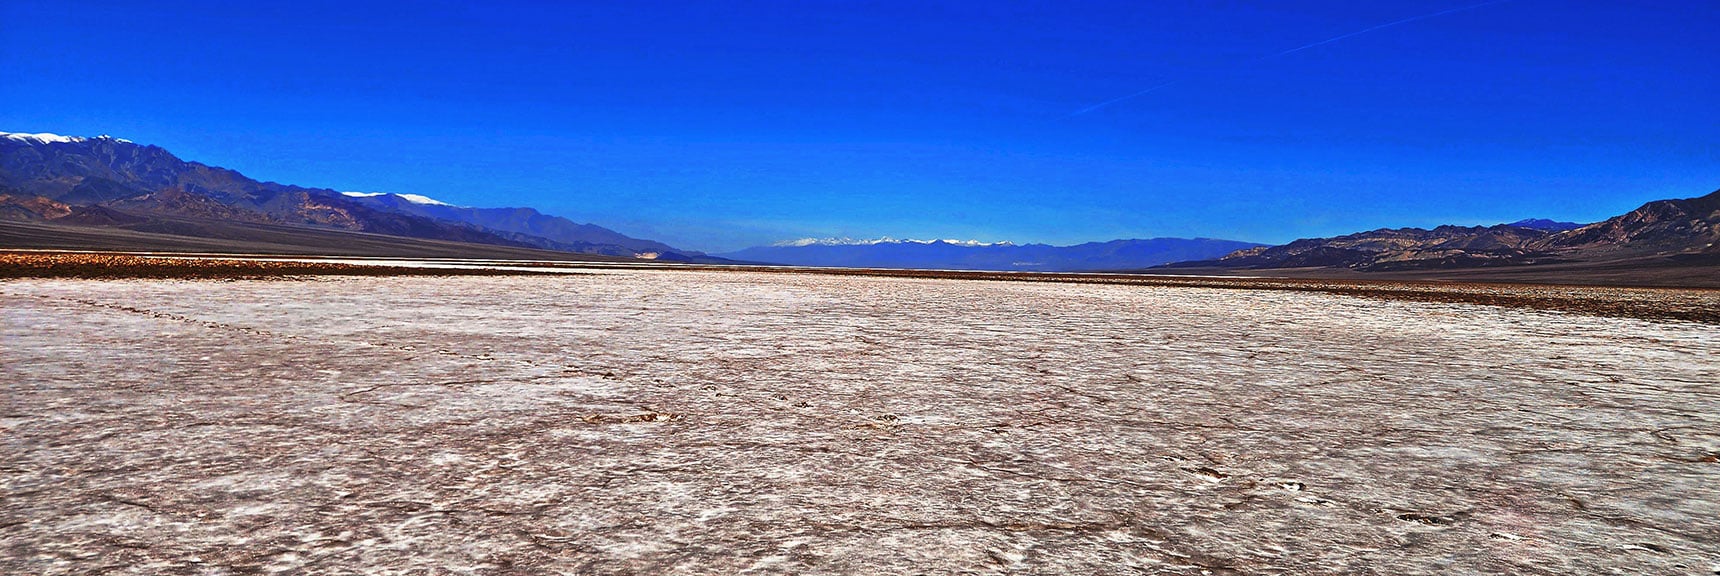 View North Across the Large Salt Flat. The Wind Today is Roaring Constantly | Death Valley Crossing | Death Valley National Park, California | David Smith | LasVegasAreaTrails.com